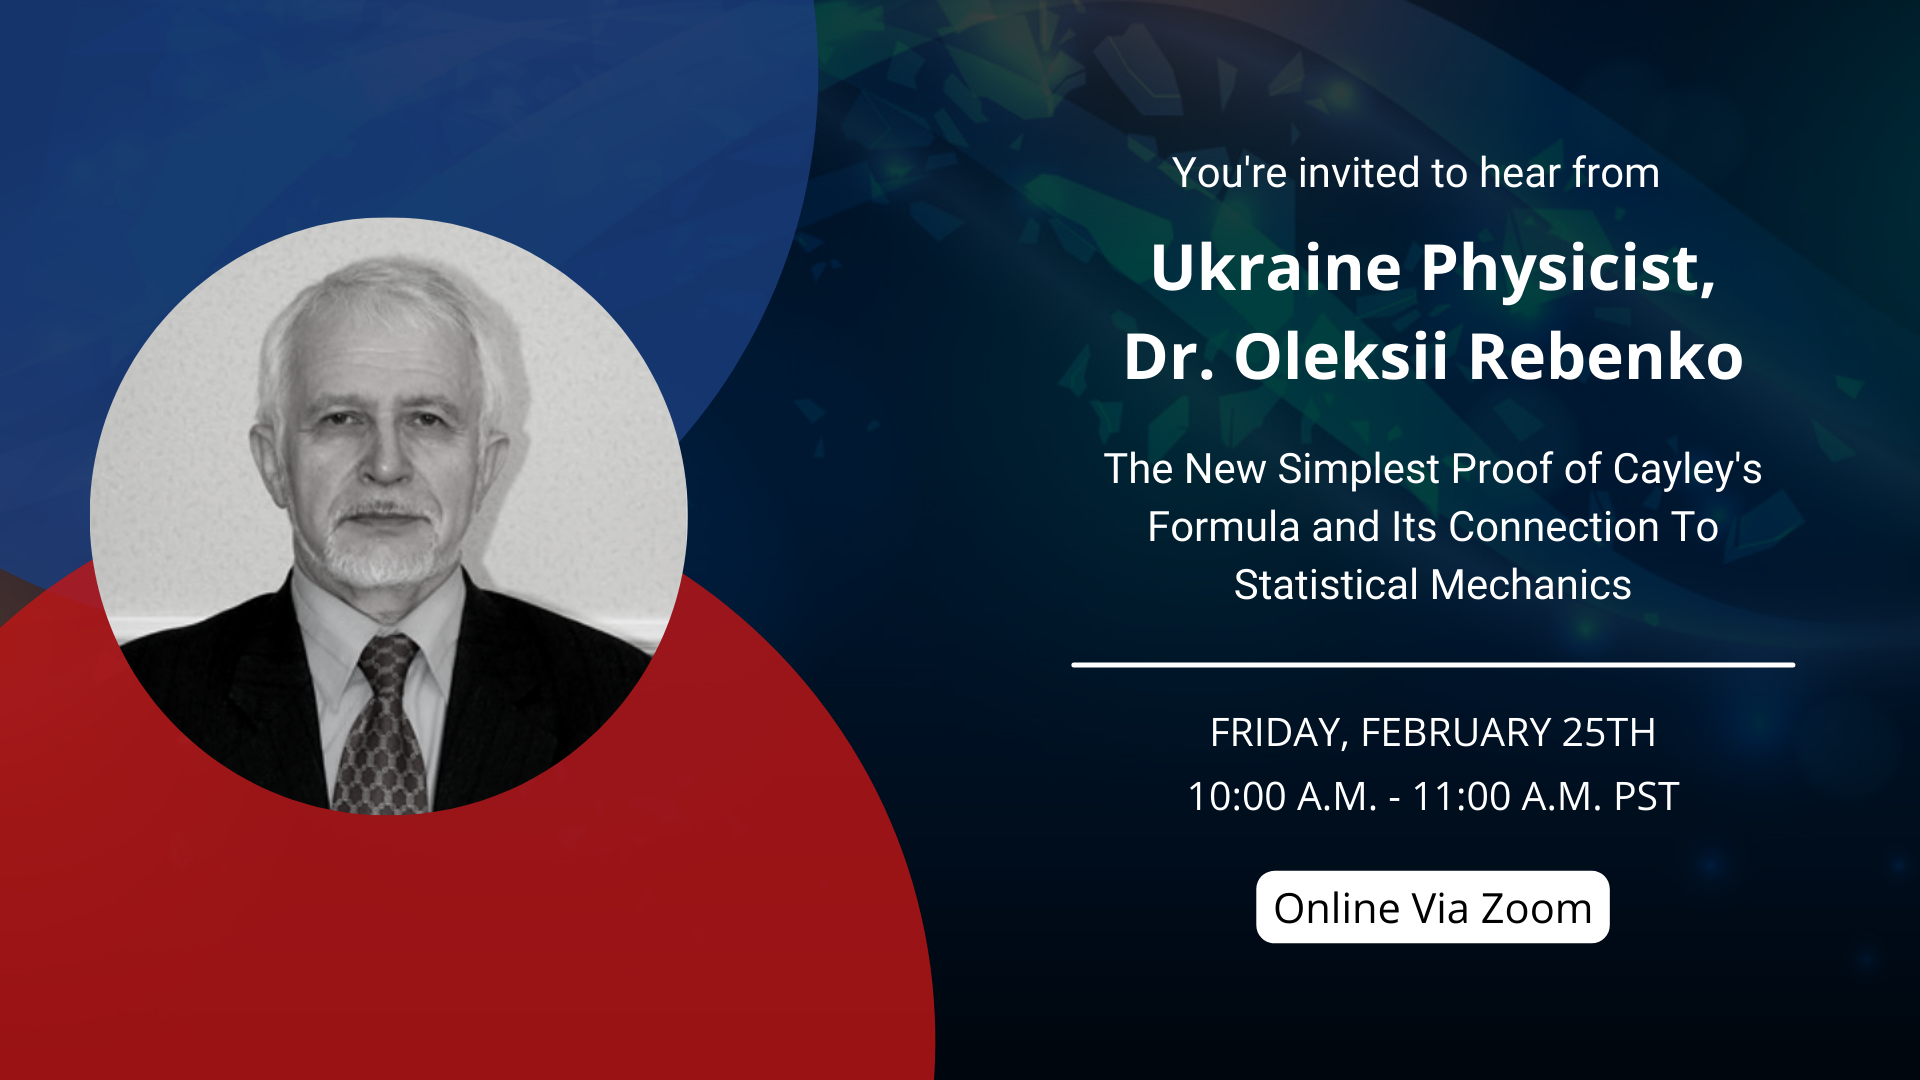 Join Us As Ukraine Physicist, Dr. Oleksii Rebonko Shares The New Simplest Proof of Cayley's Formula